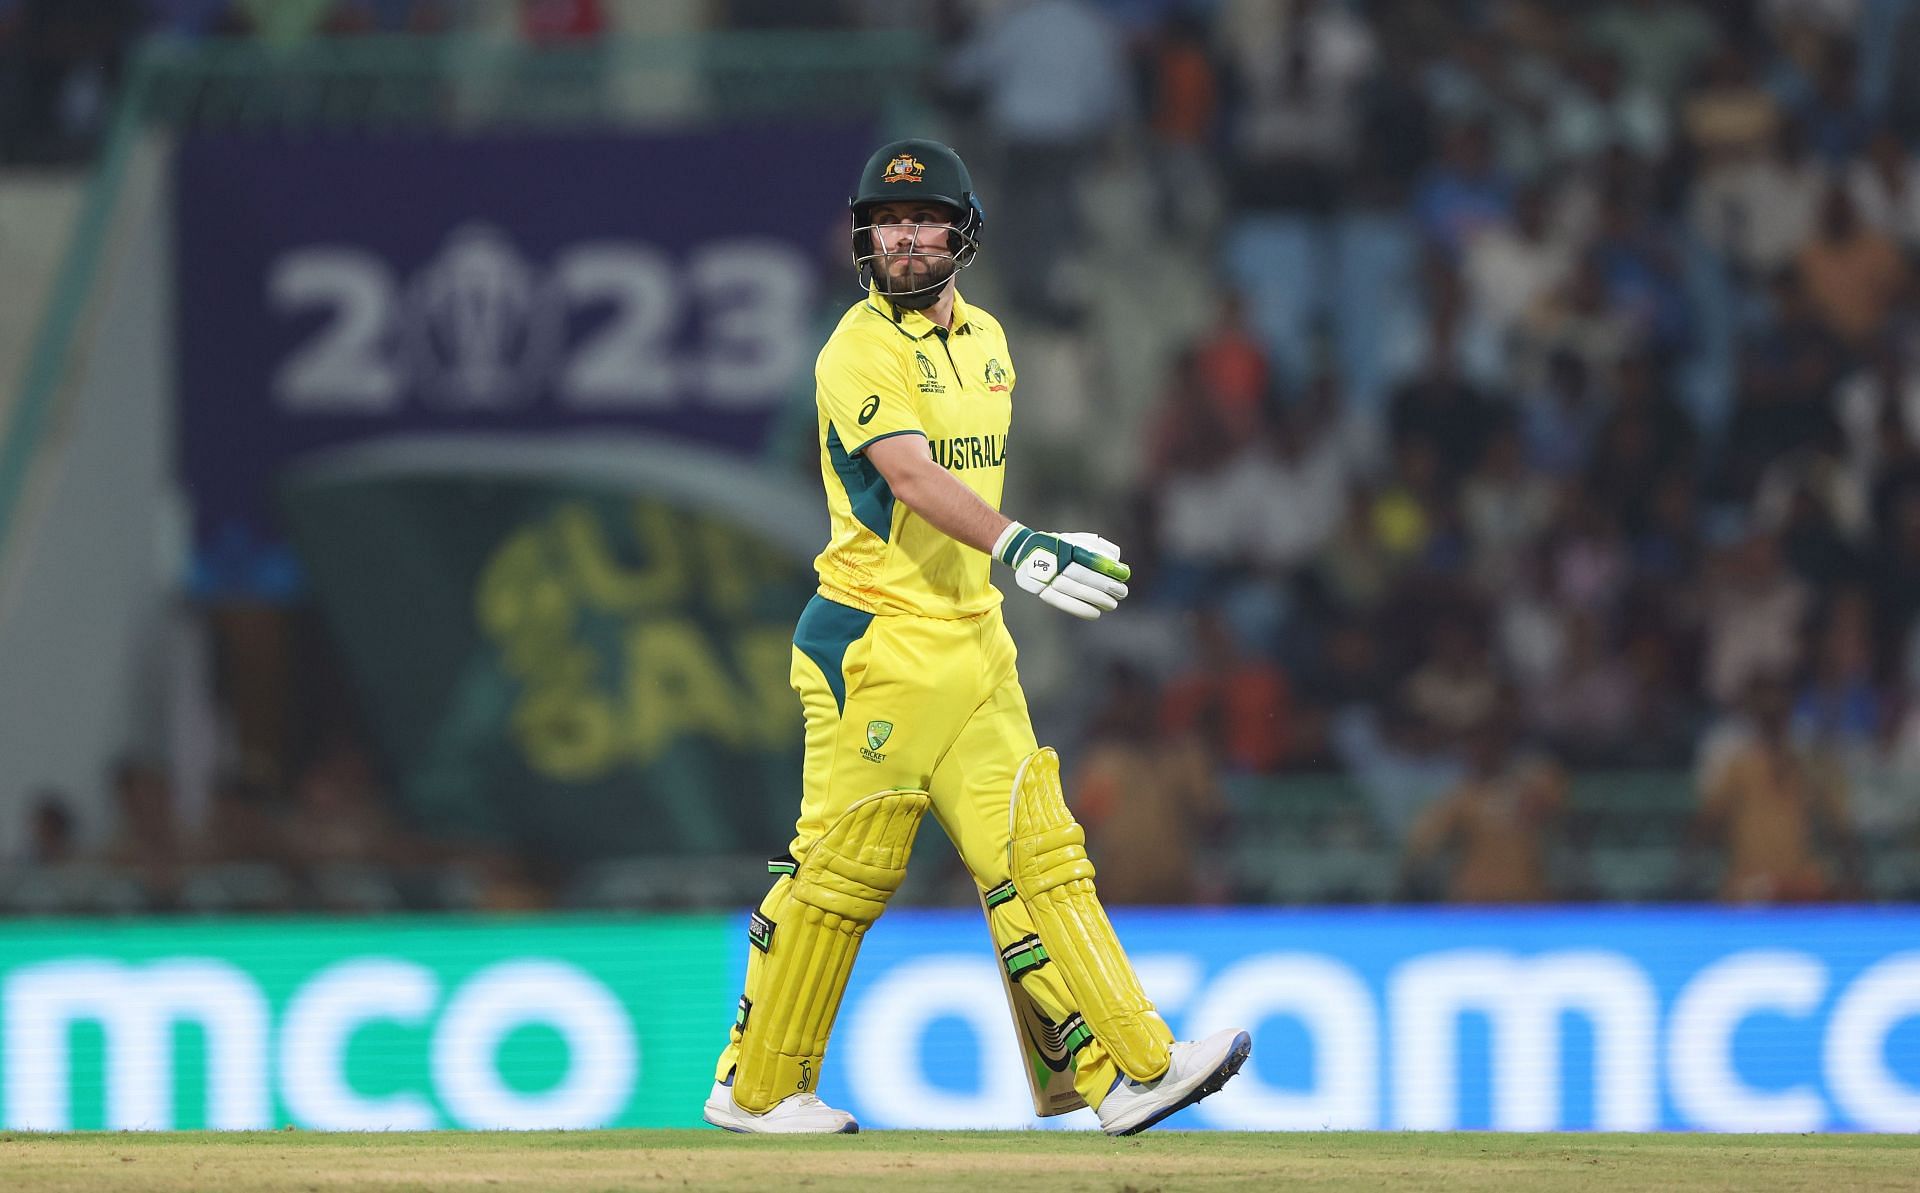 Australia will look to kickstart their campaign [Getty Images]